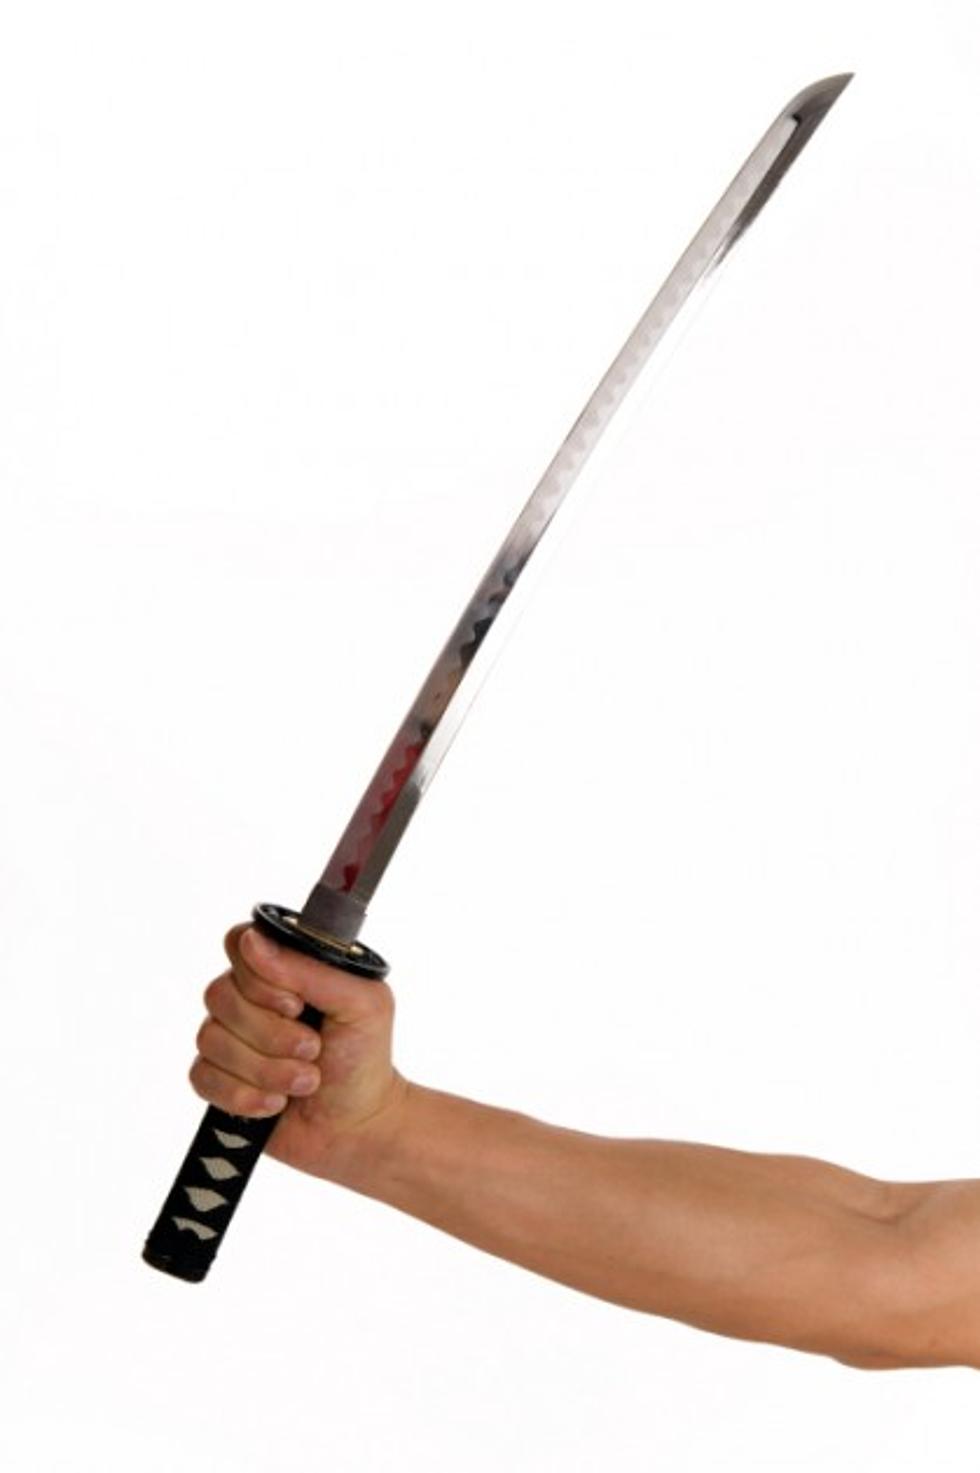 What Do I Want for My Birthday? A Katana Sword, Of Course!